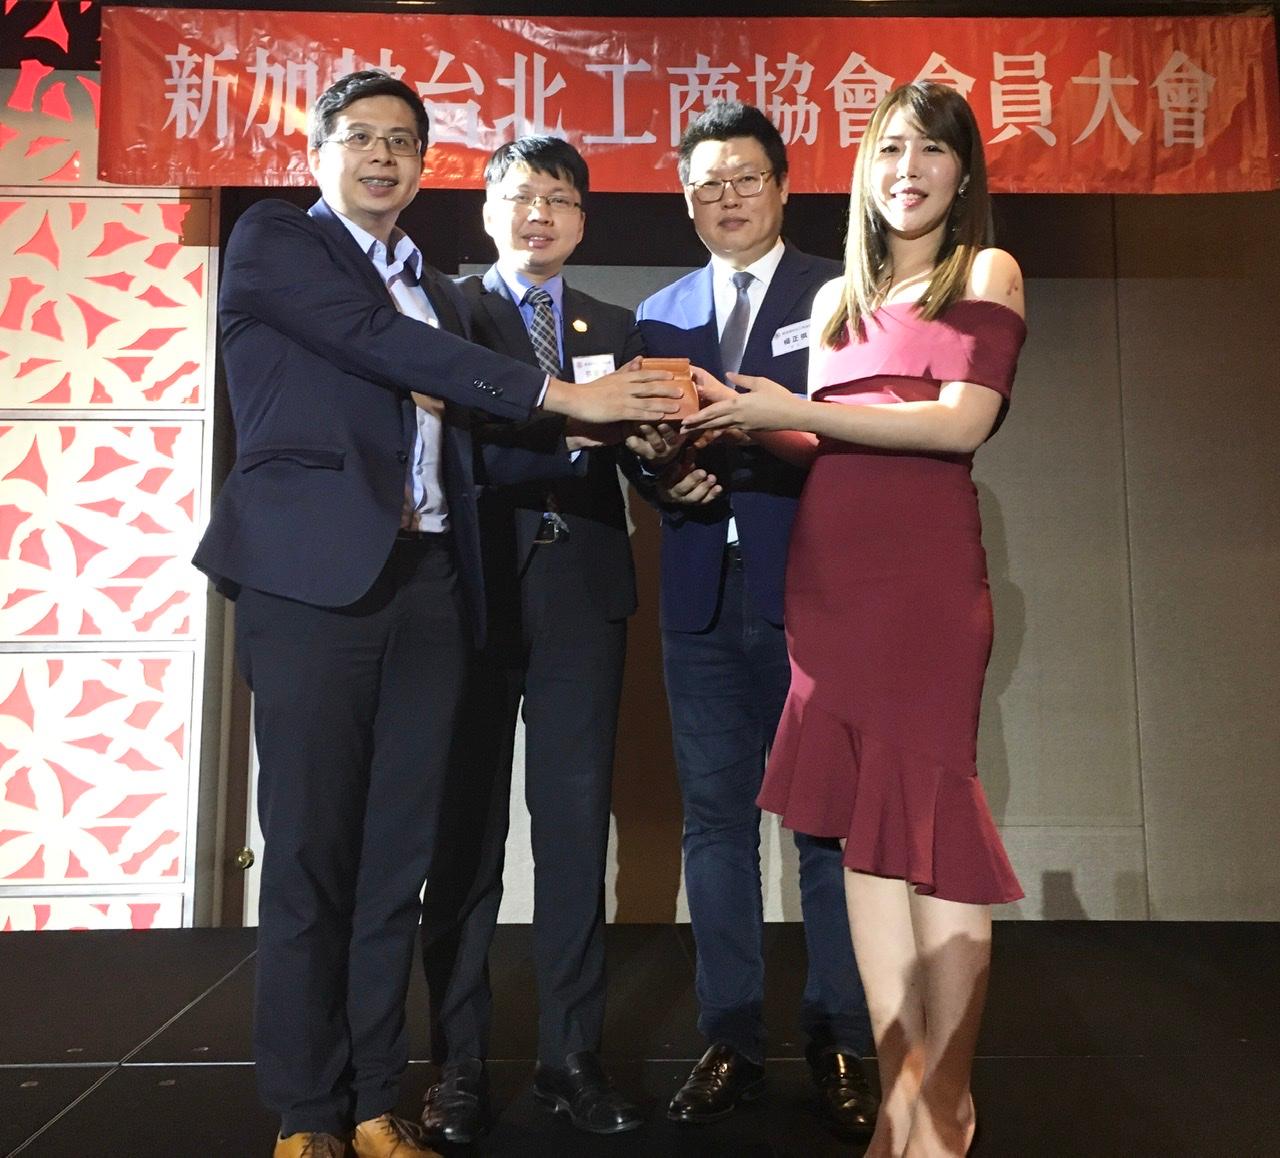 The inauguration ceremony saw the attendance of the leaders of the Junior Club of the Taipei Business Association in Singapore. (2020/01/18)